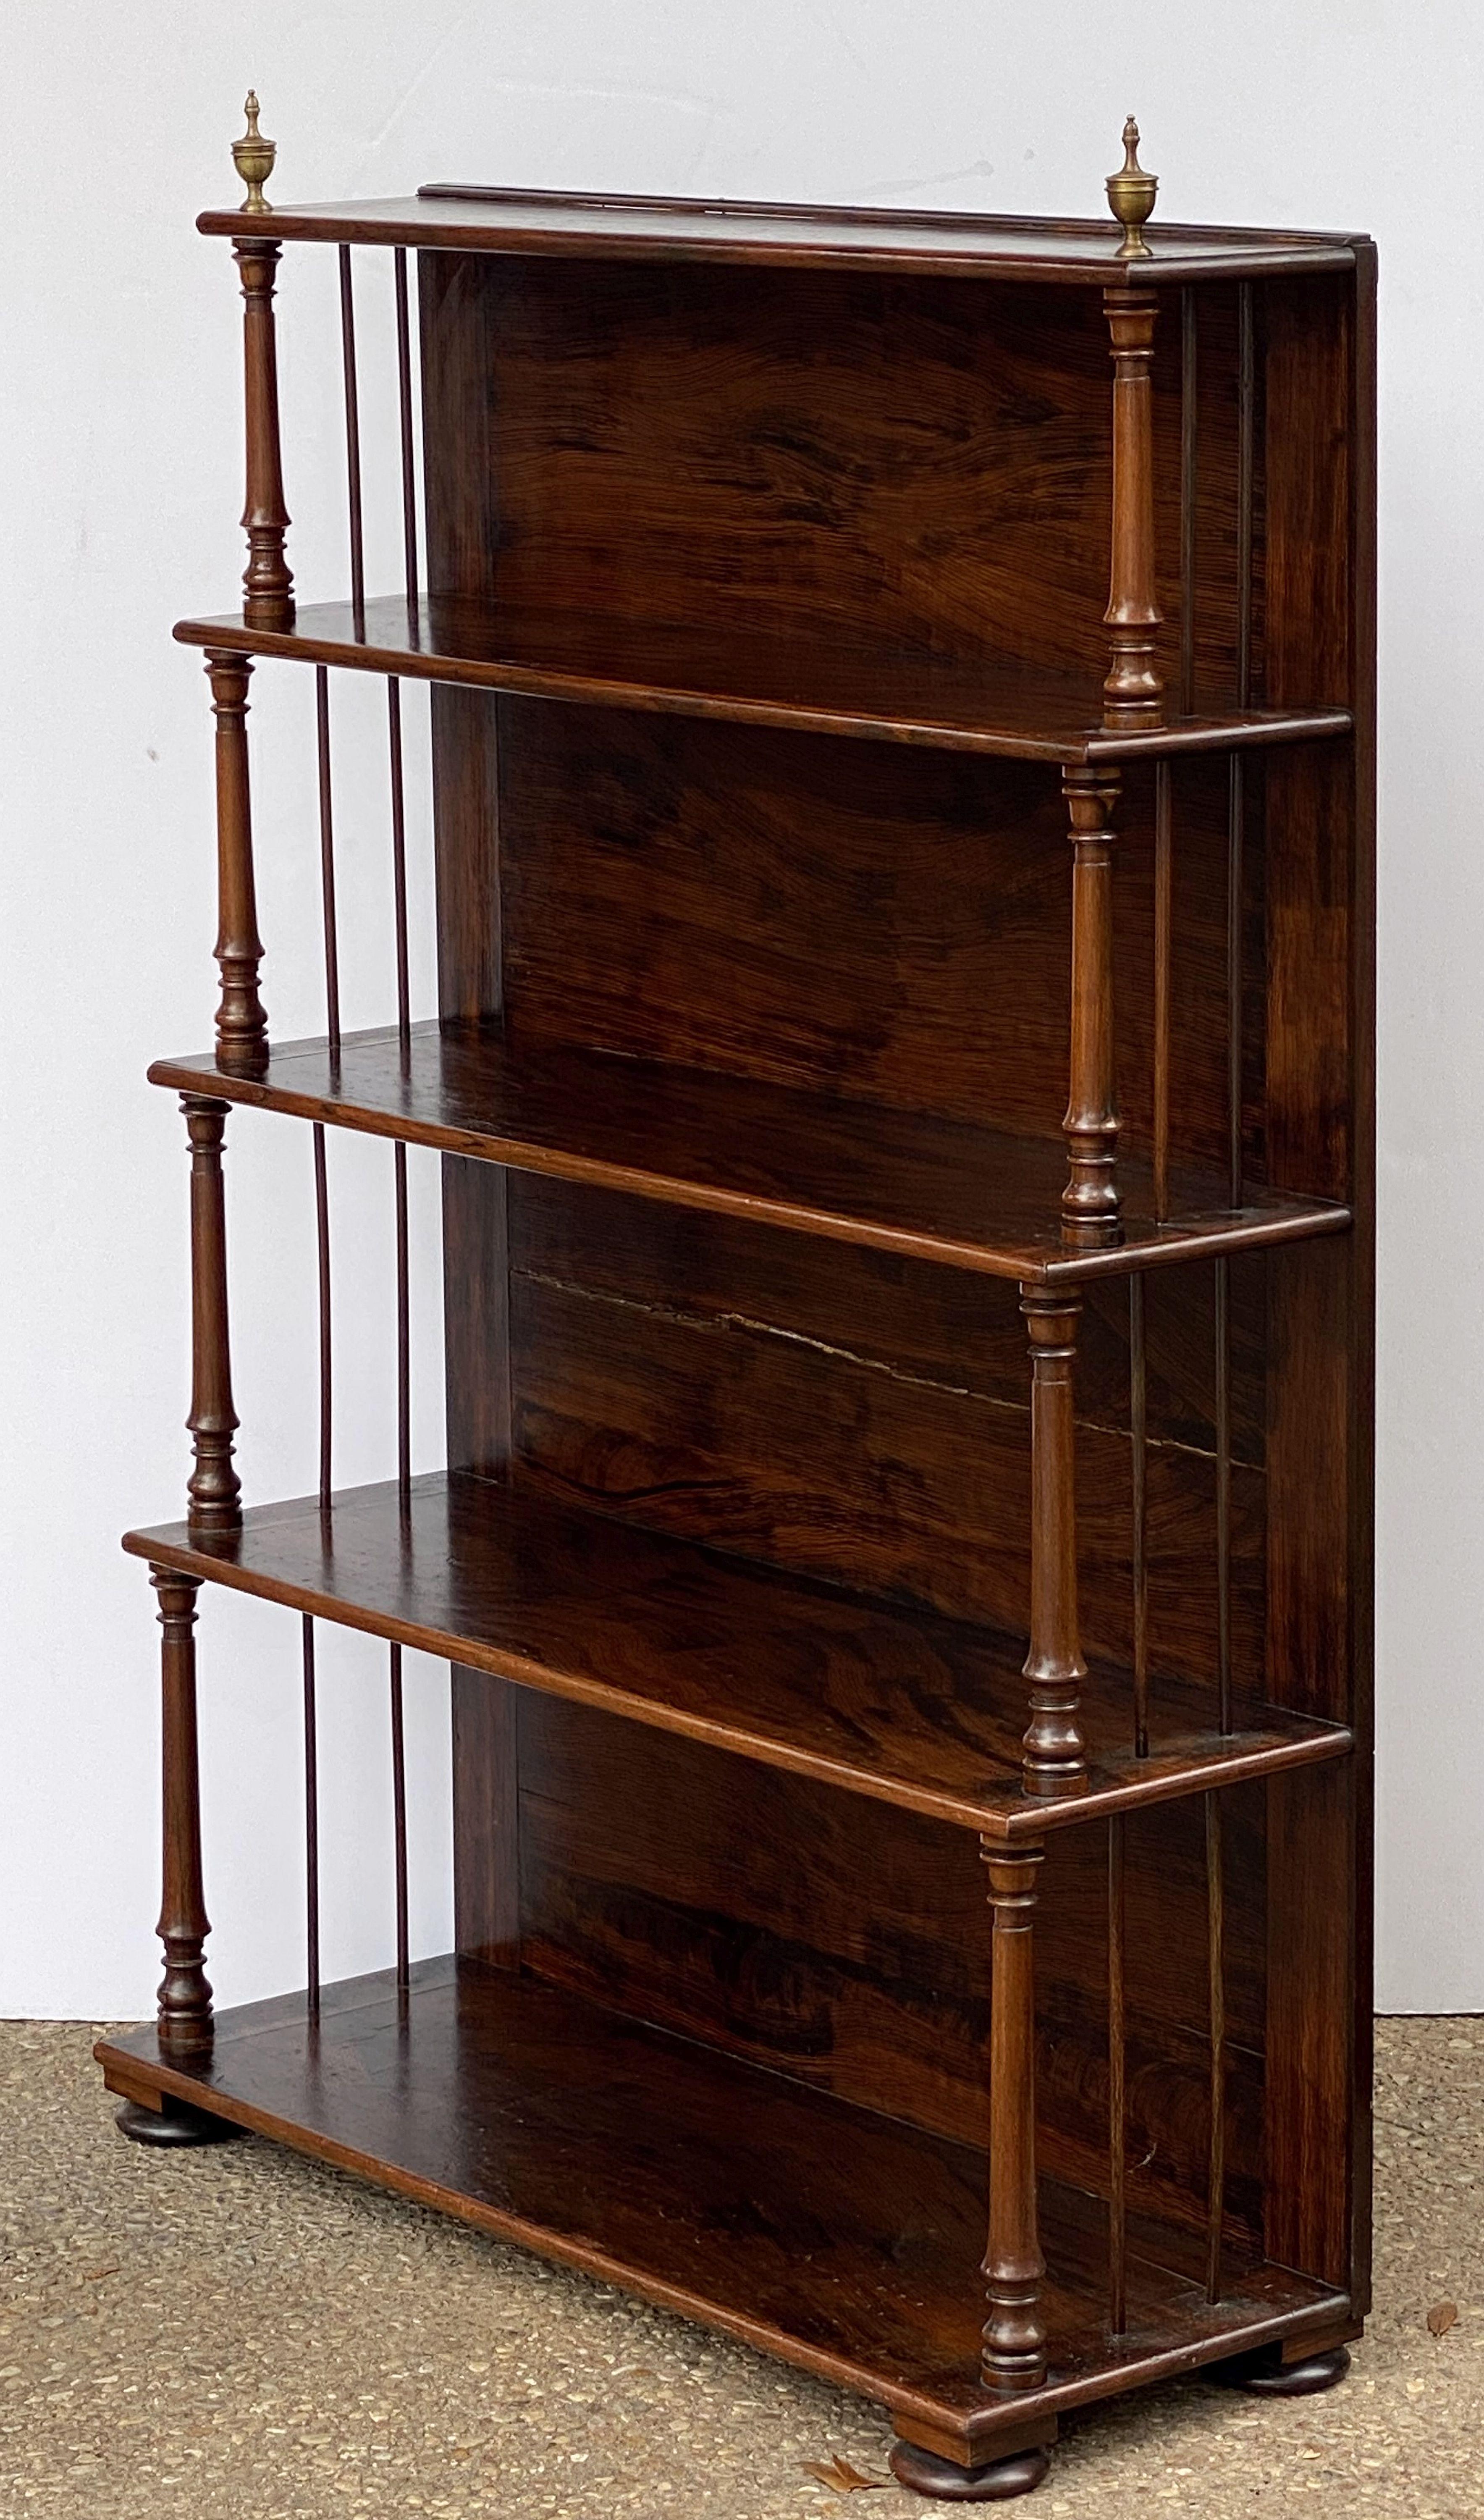 A fine English open bookcase or étagère of mahogany from the Edwardian era, featuring graduated shelves with a handsome faux wood grain finish, turned column supports, and decorative brass finials.

Dimensions: H 54 1/2 inches (top of finials) x W